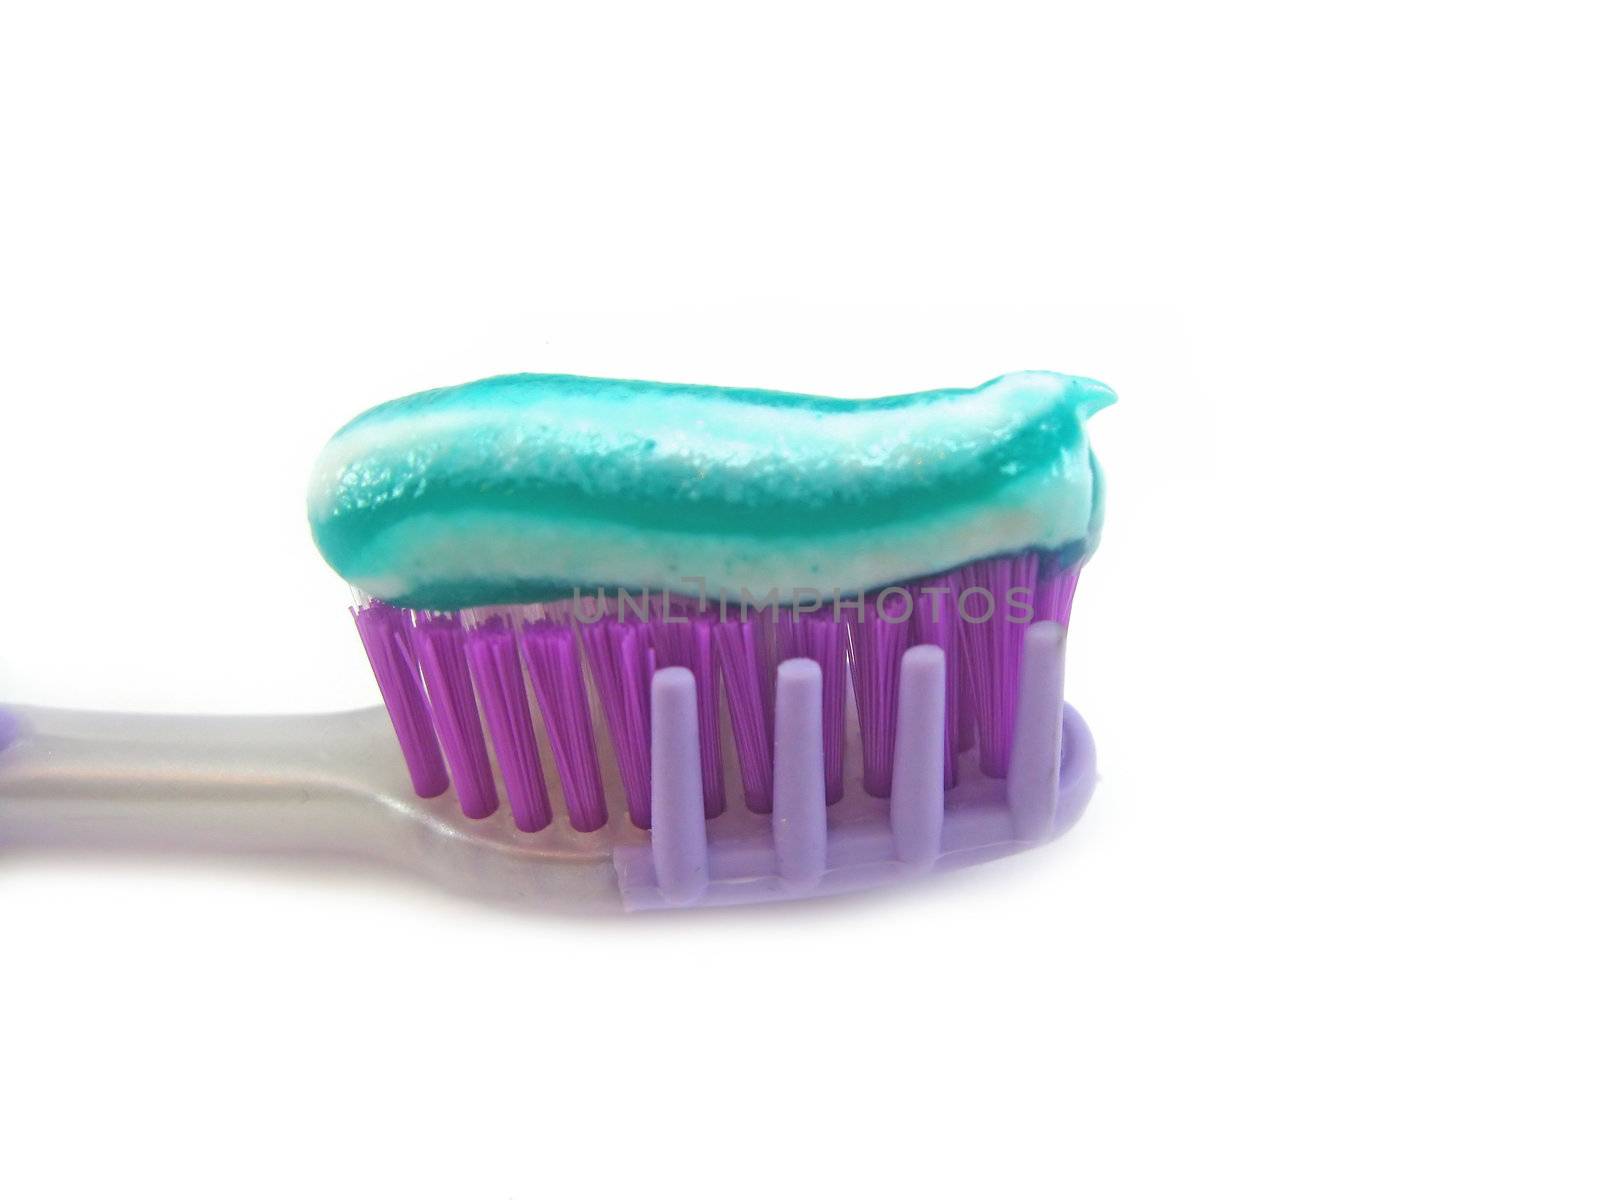 Tooth-paste and tooth-brush